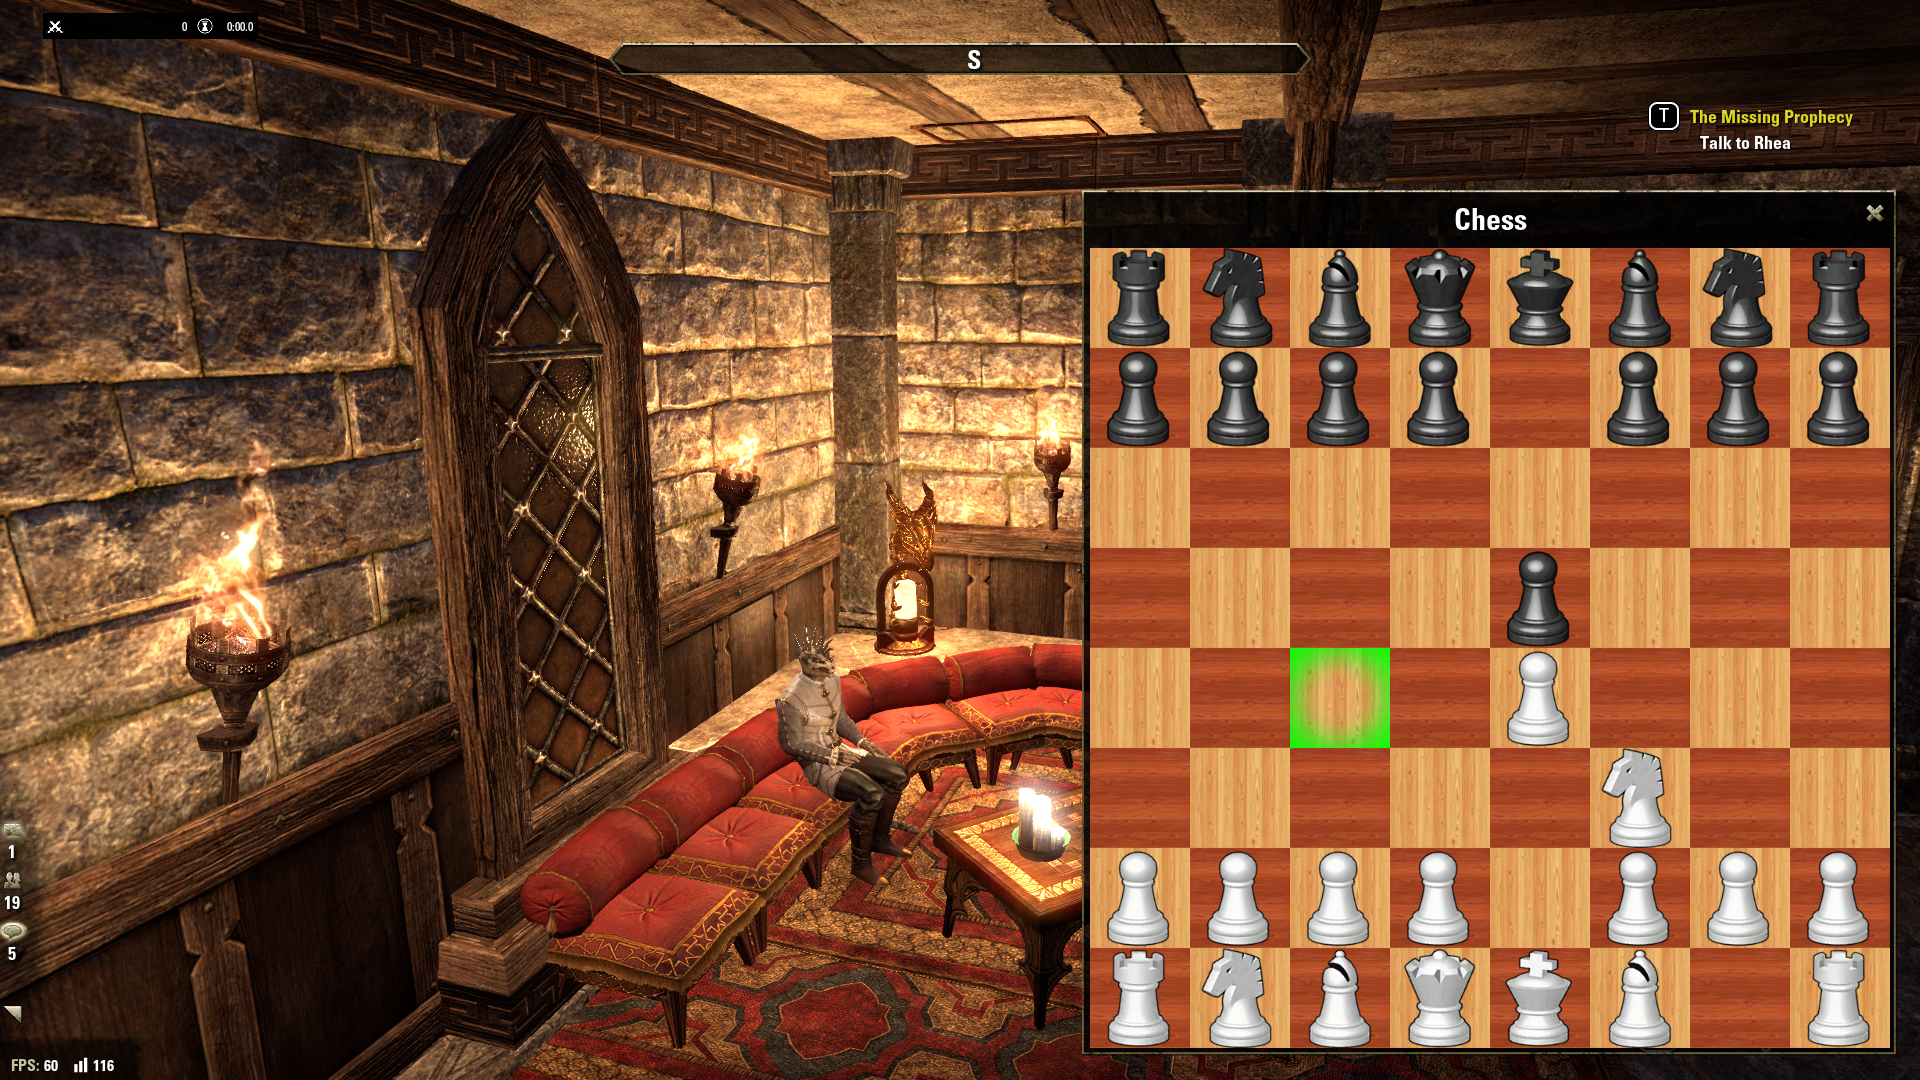 online chess multiplayer computer